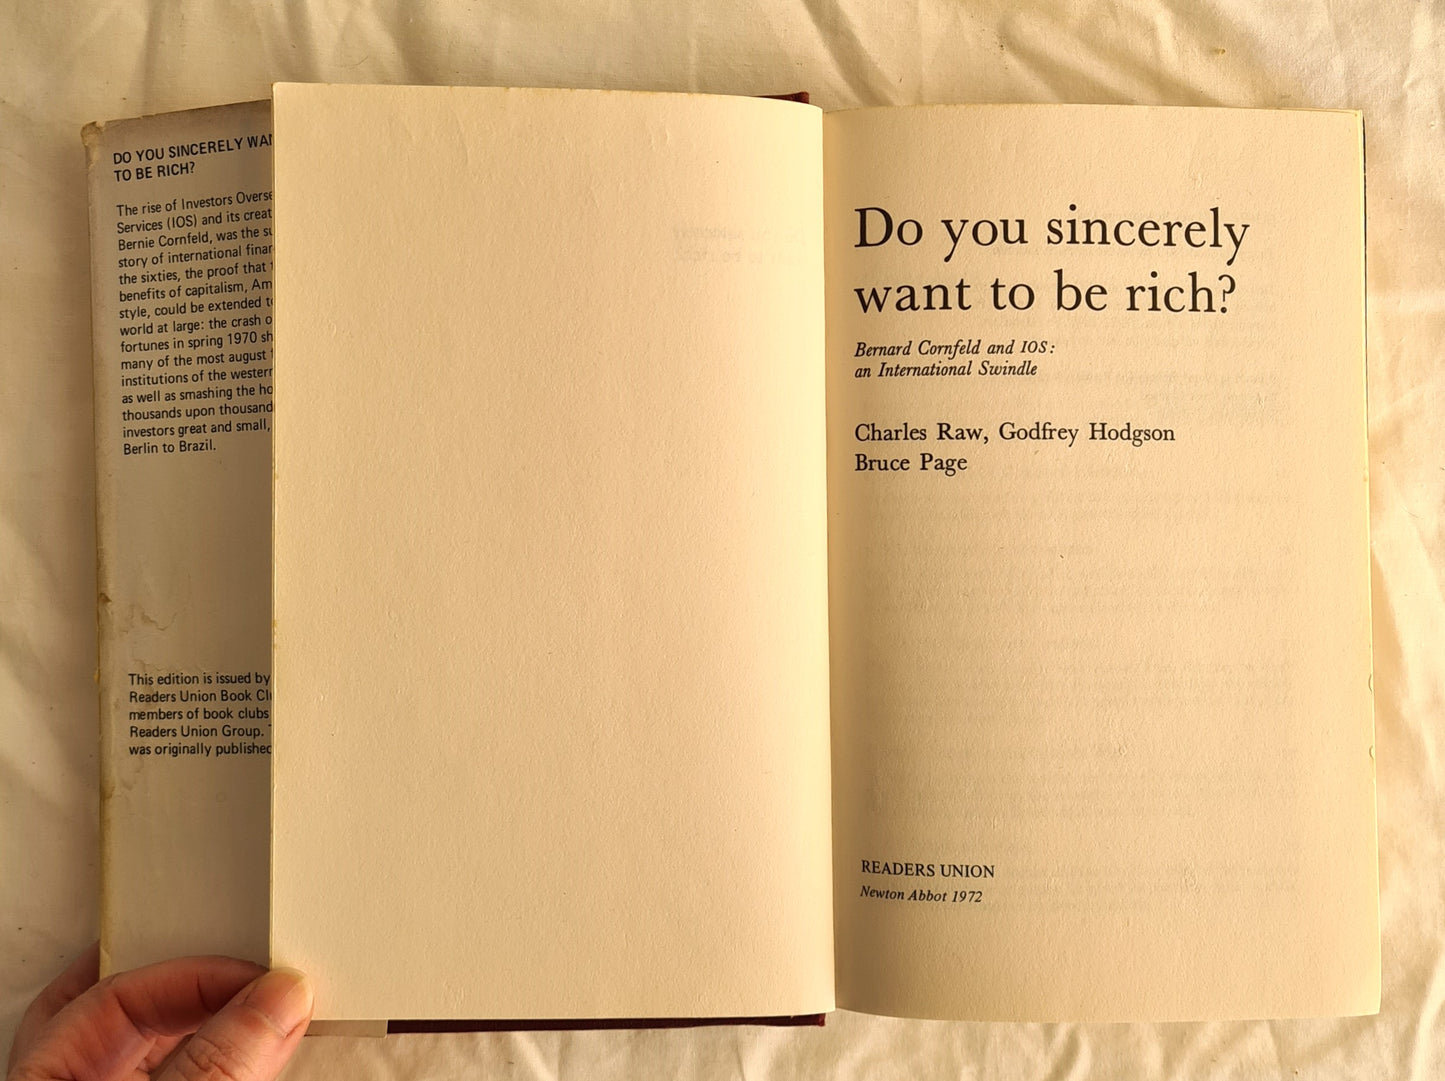 Do You Sincerely Want to Be Rich? by Charles Raw, Godfrey Hodgson and Bruce Page